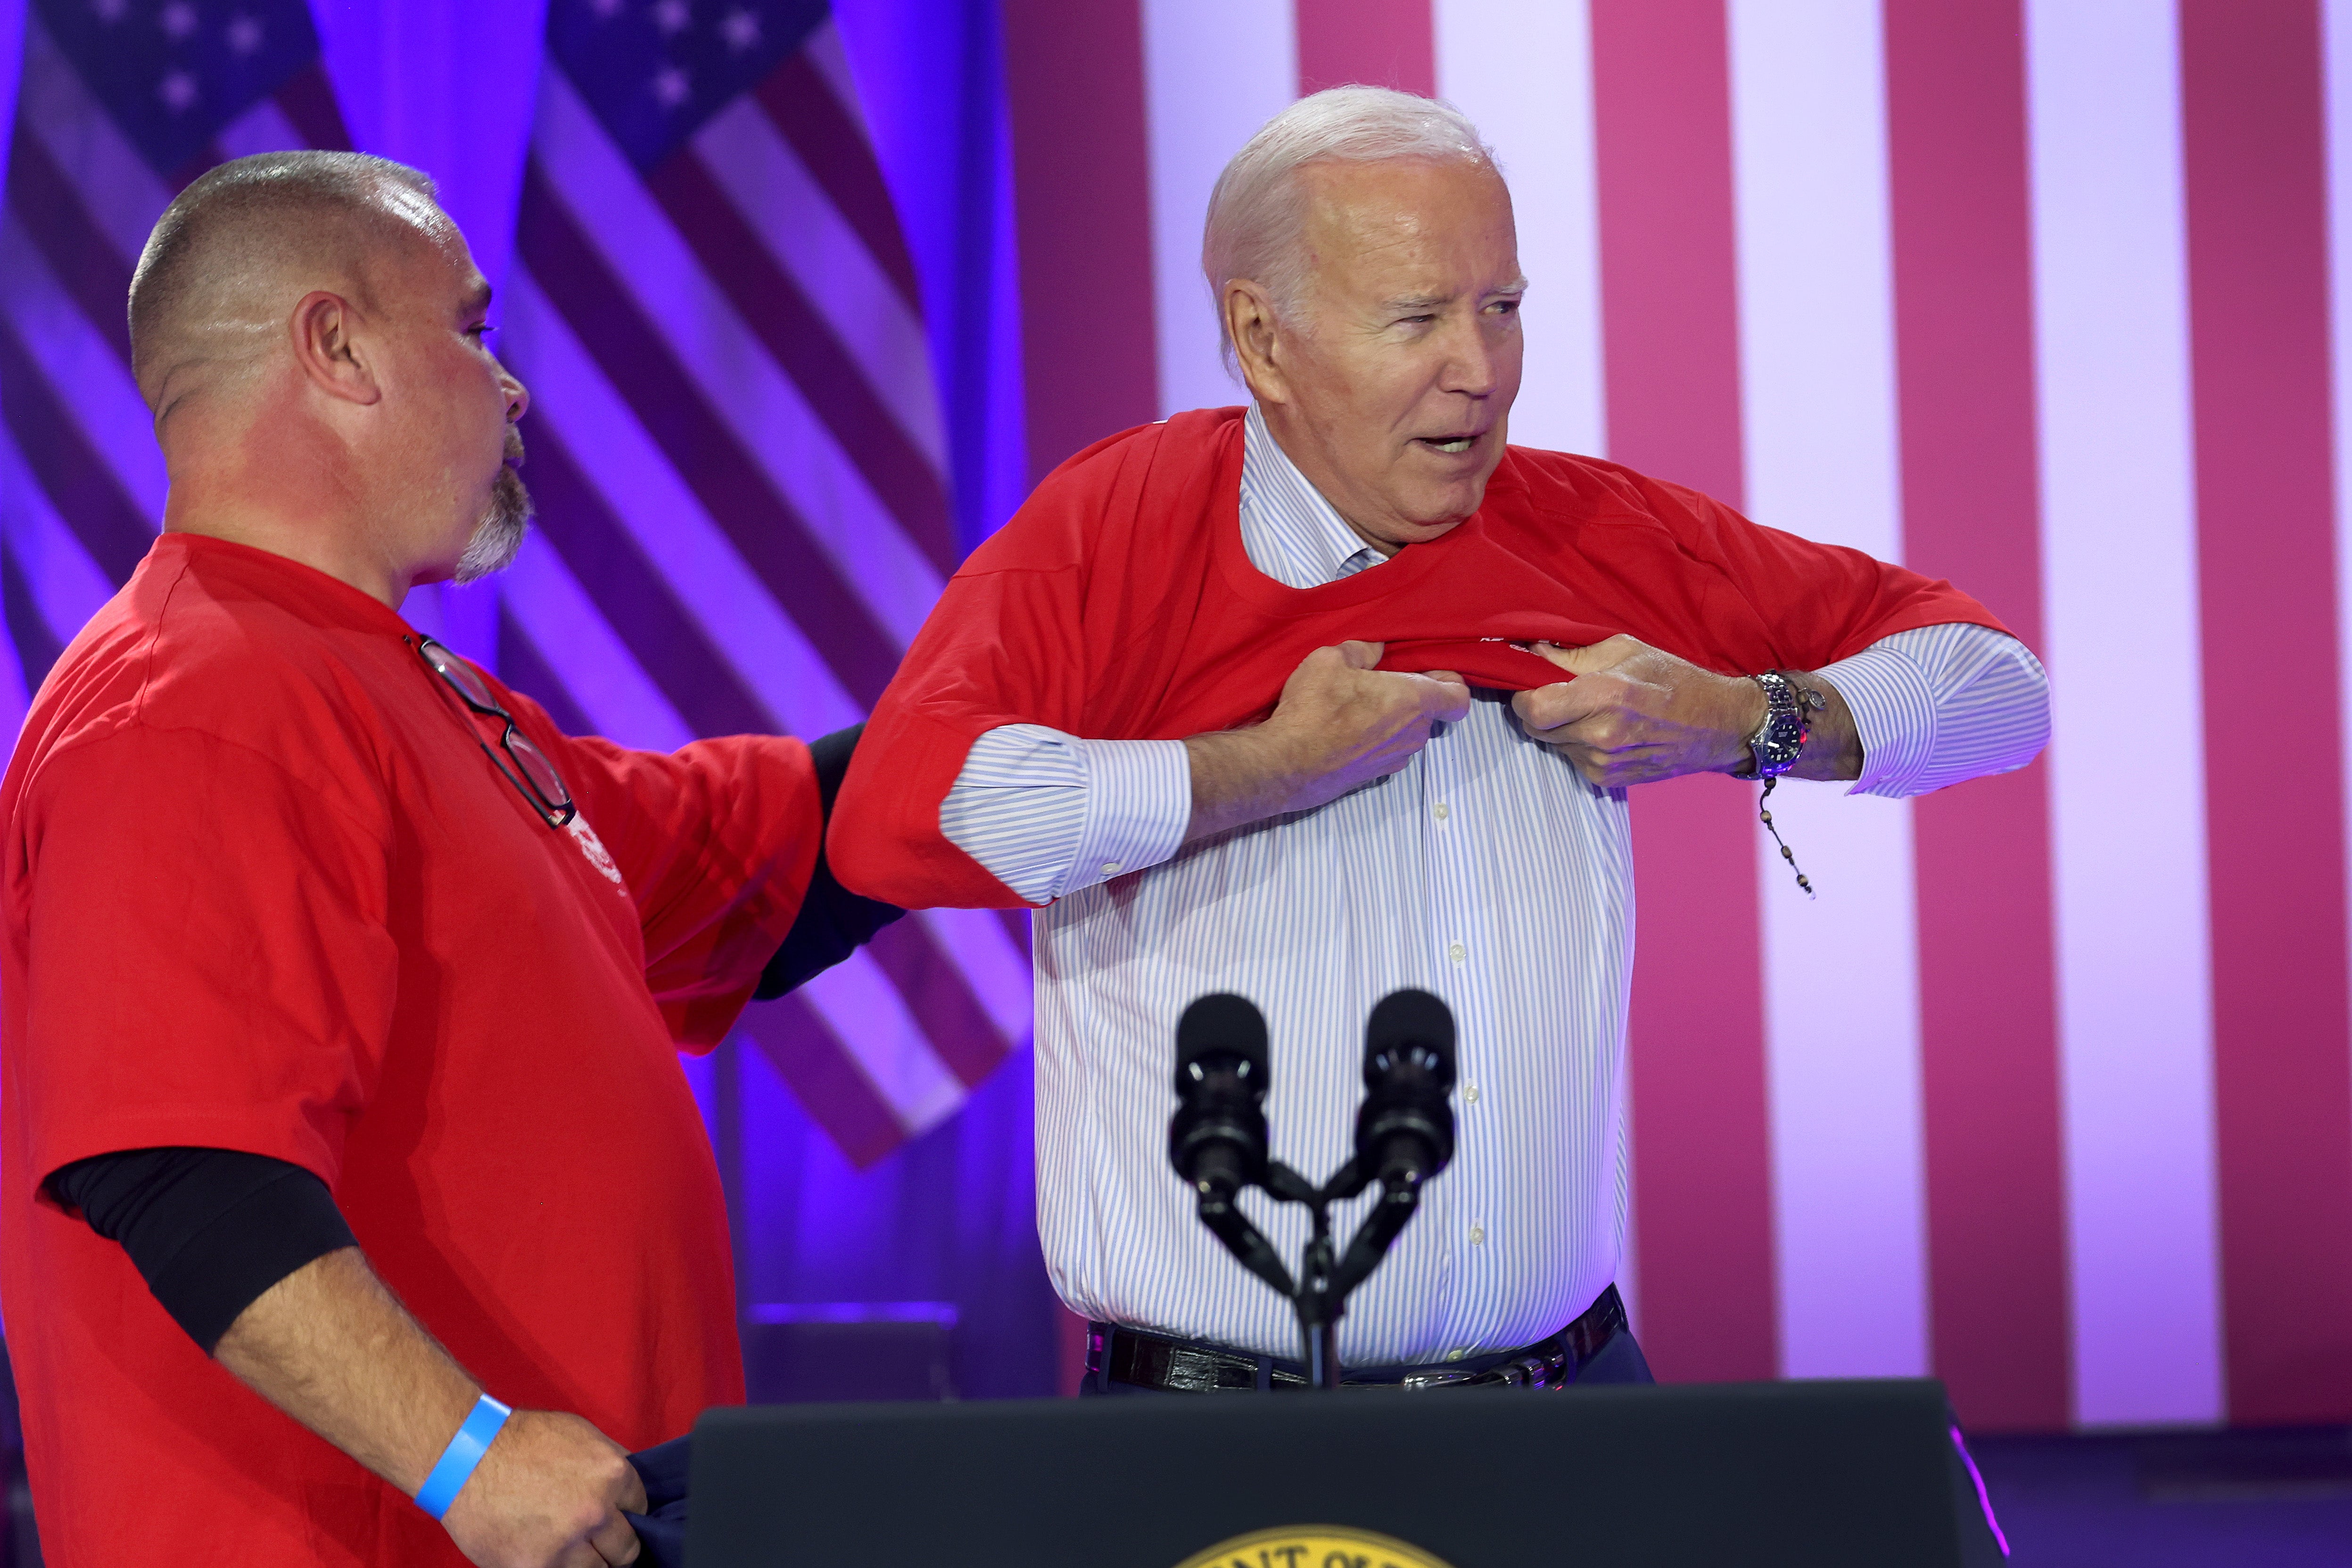 Biden puts on a United Auto Workers shirt before speaking to autoworkers in Belvidere, Illinois